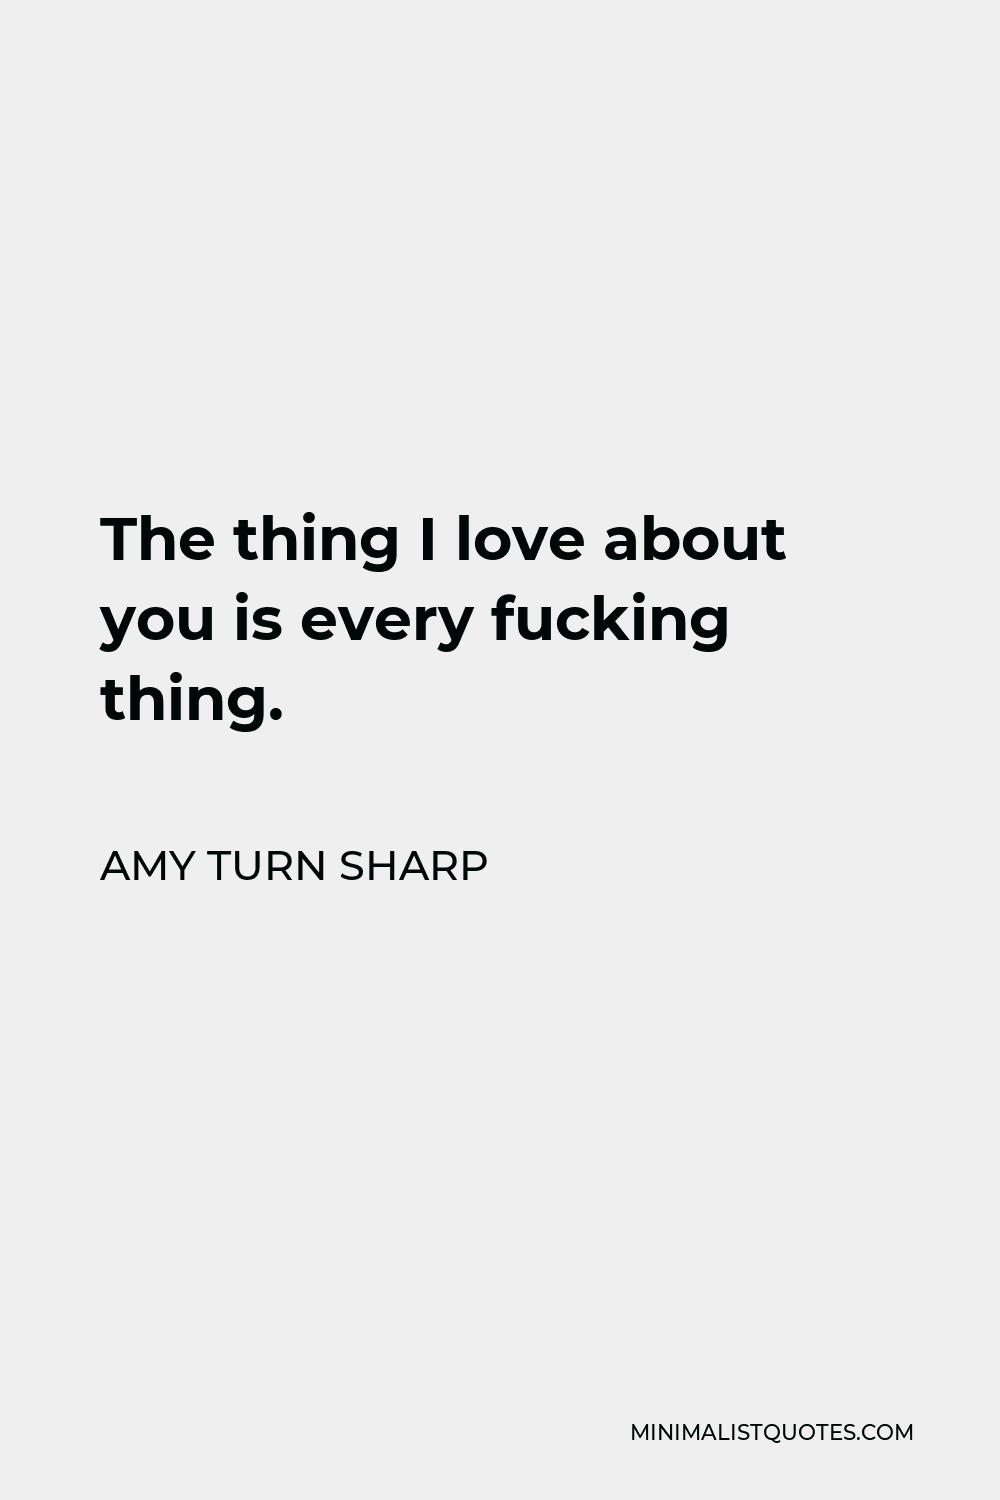 Amy Turn Sharp Quote - The thing I love about you is every fucking thing.